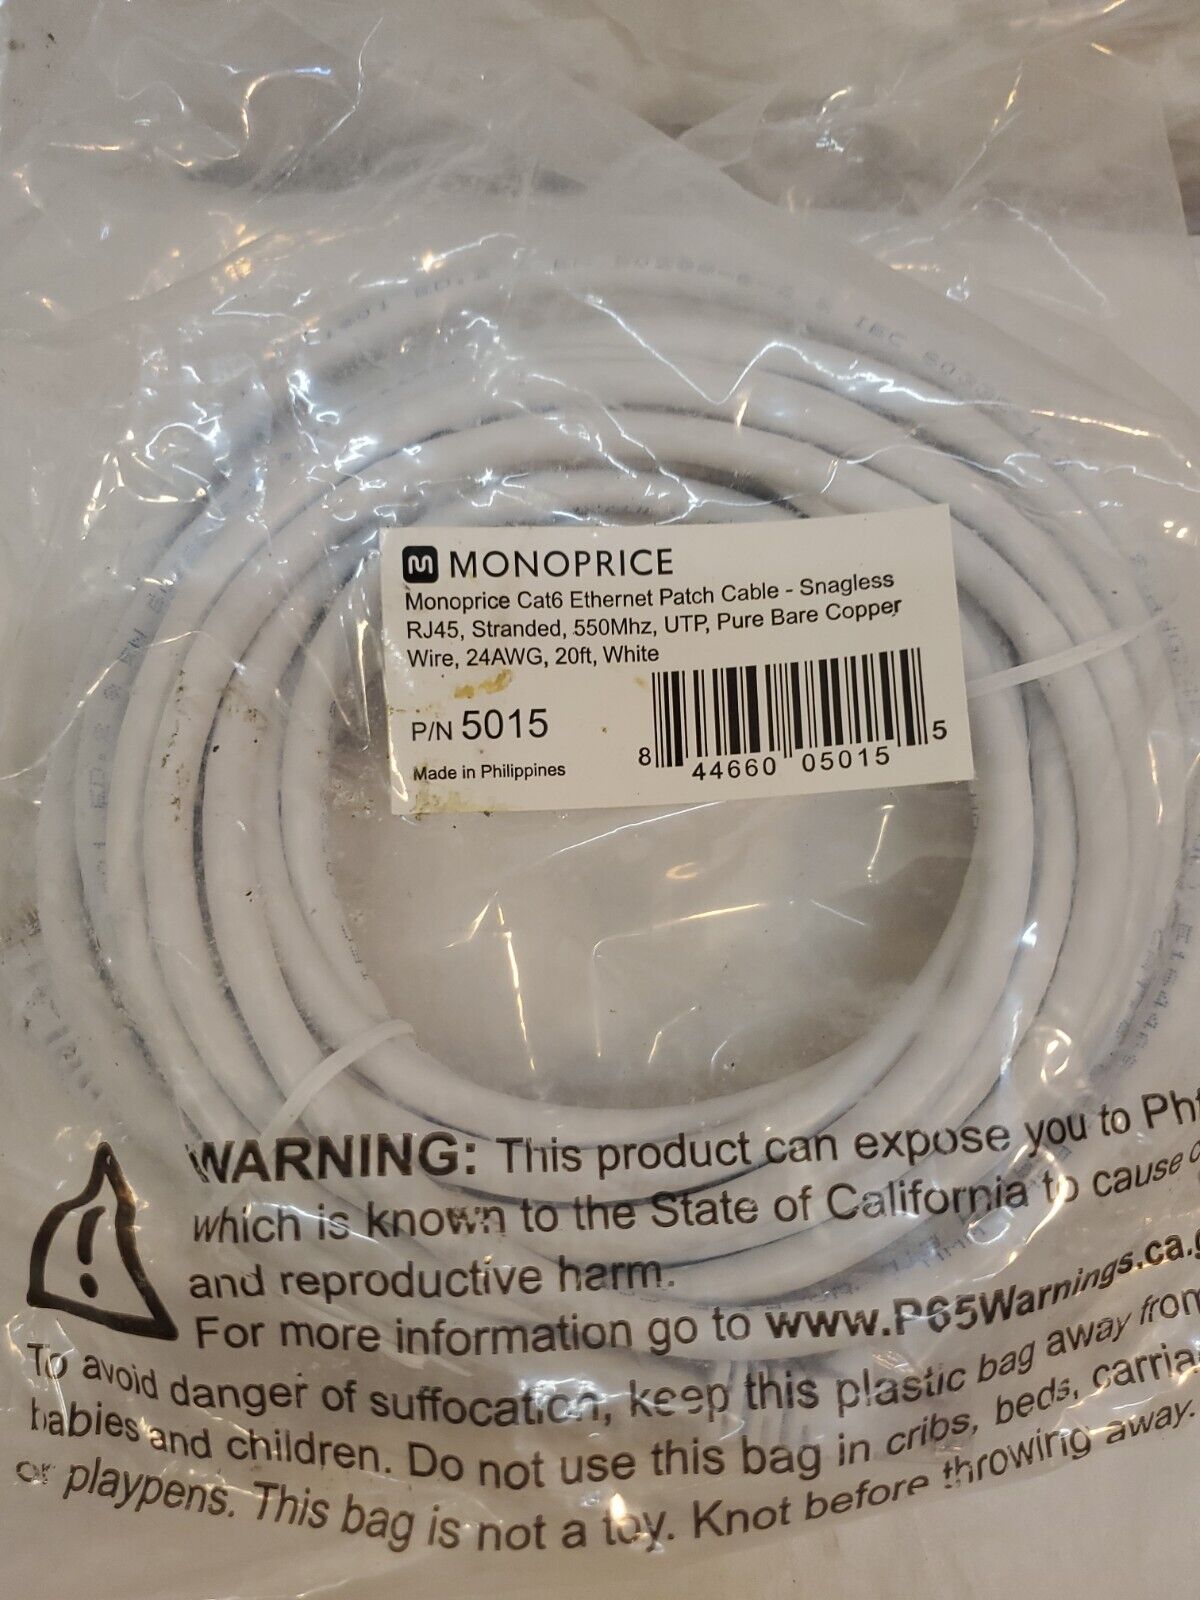 Monoprice 20' RJ45 to RJ45 Networking Cable Male to Male White (105015)